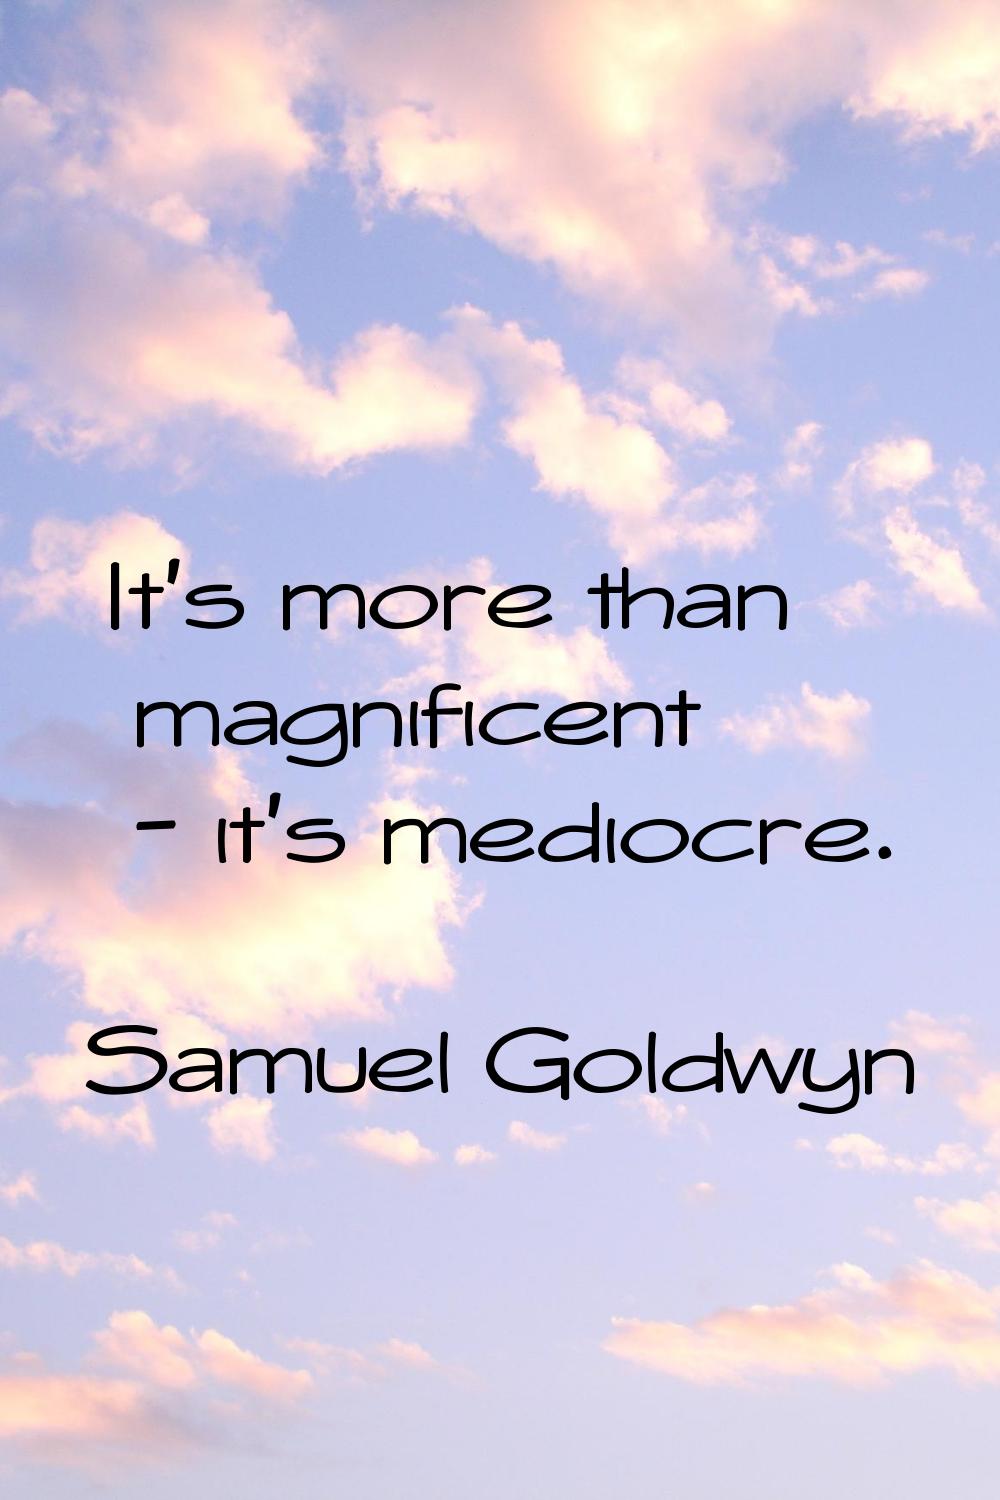 It's more than magnificent - it's mediocre.